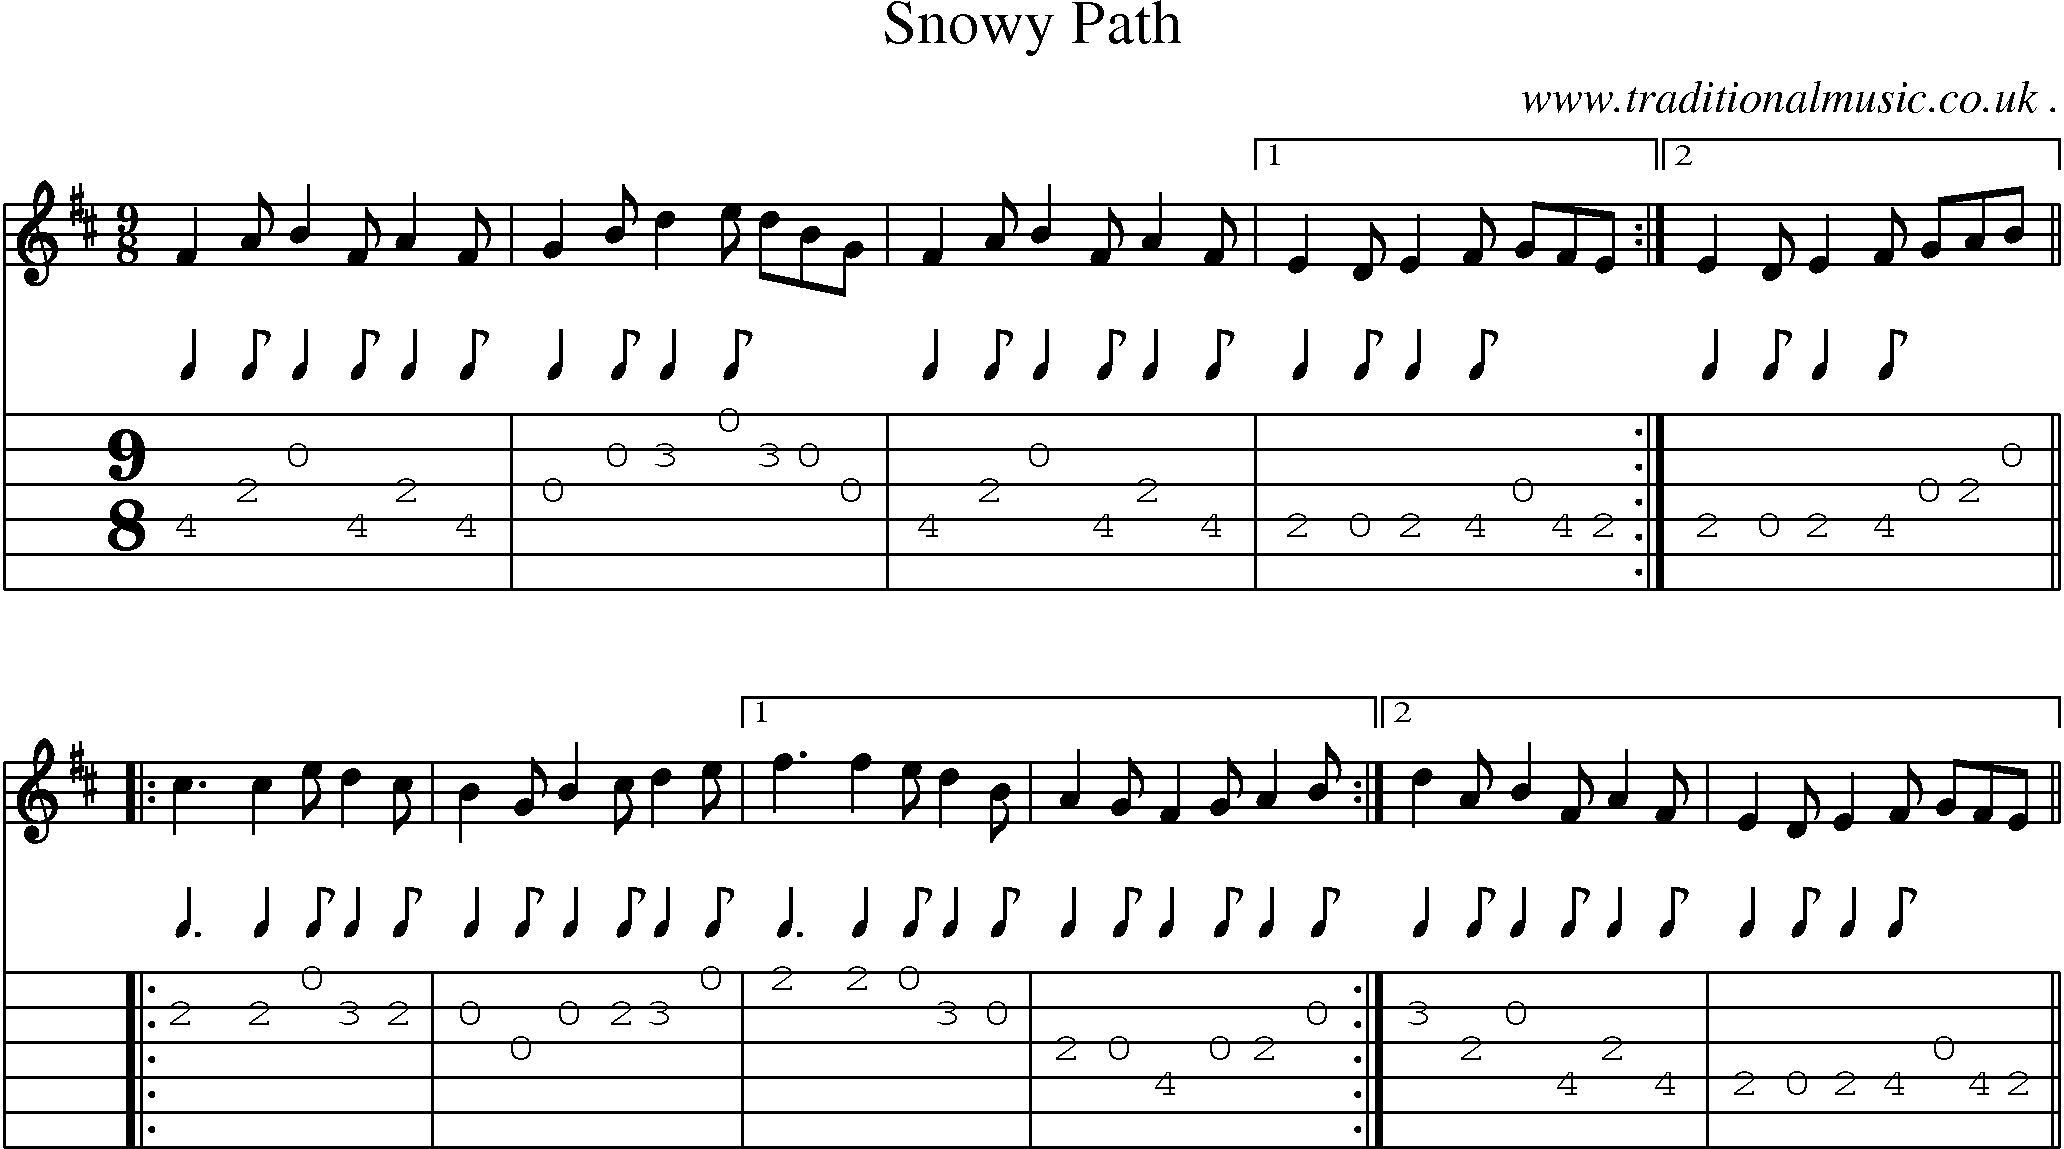 Sheet-Music and Guitar Tabs for Snowy Path